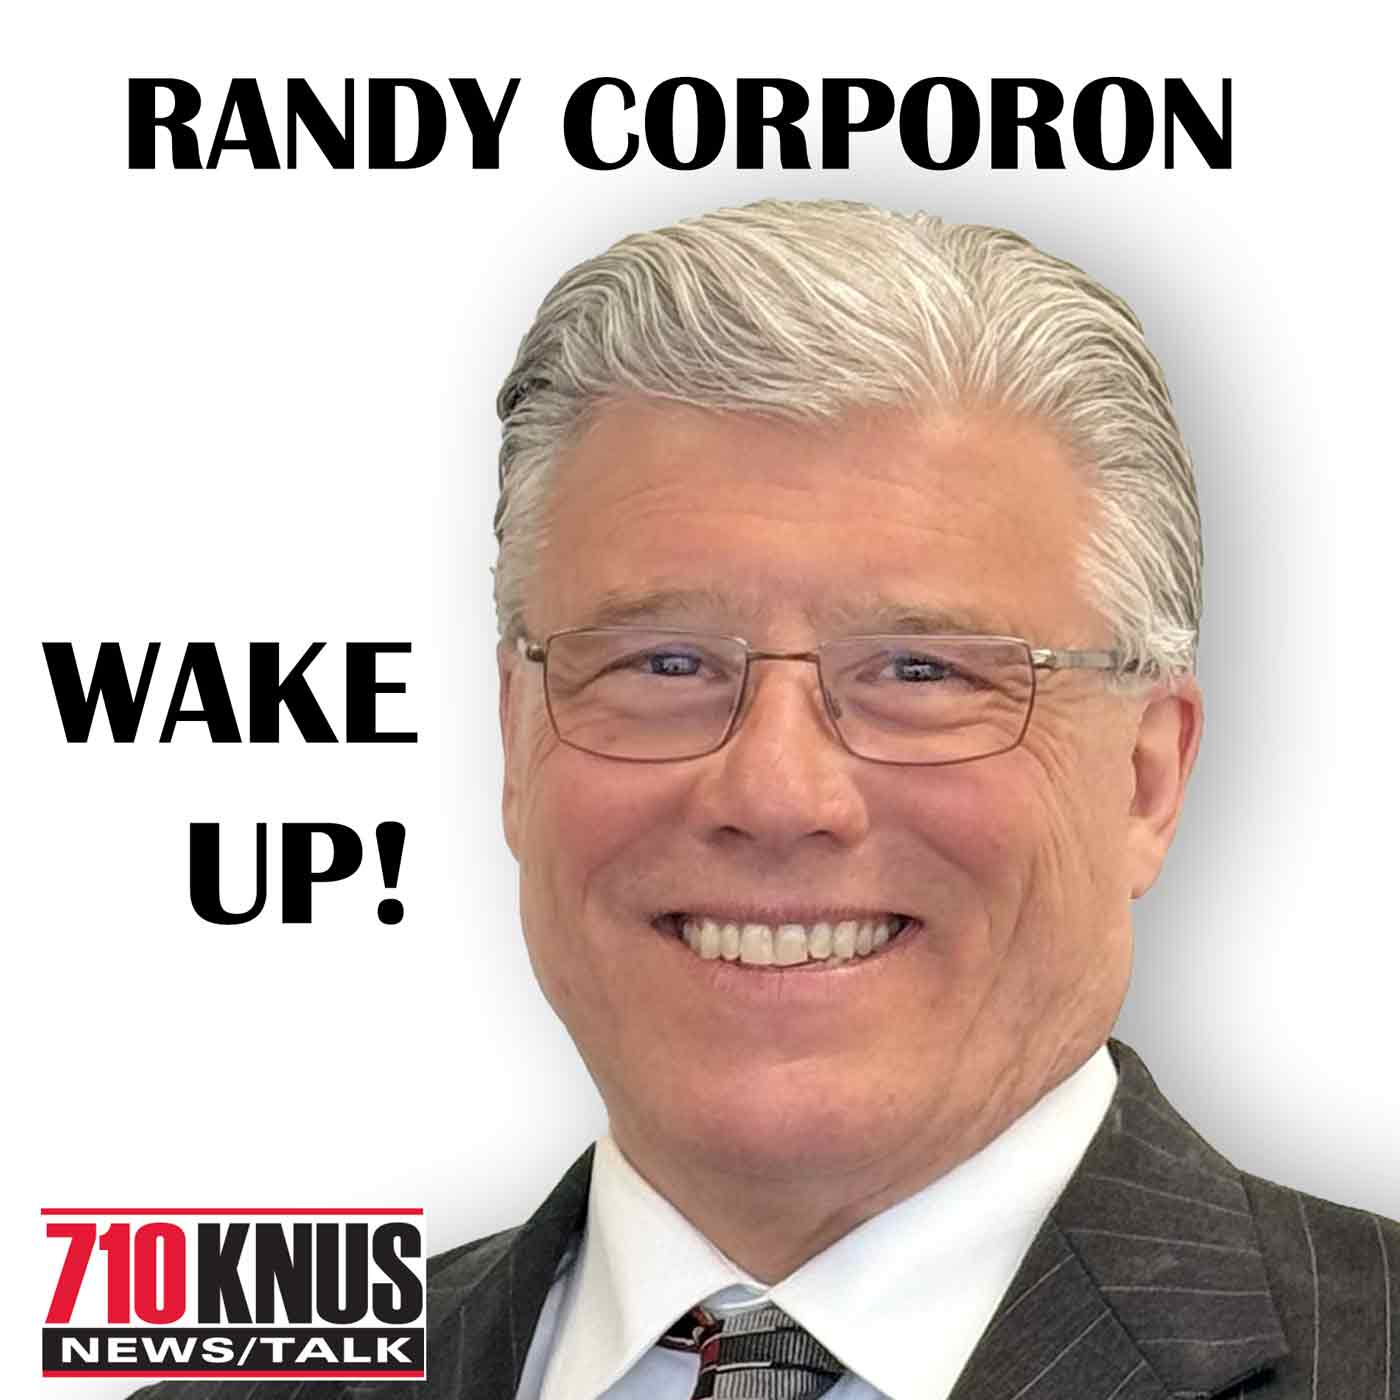 Don't Sleep In! Wake Up! With Randy Corporon - Dec 21, 2019 - 6-9AM